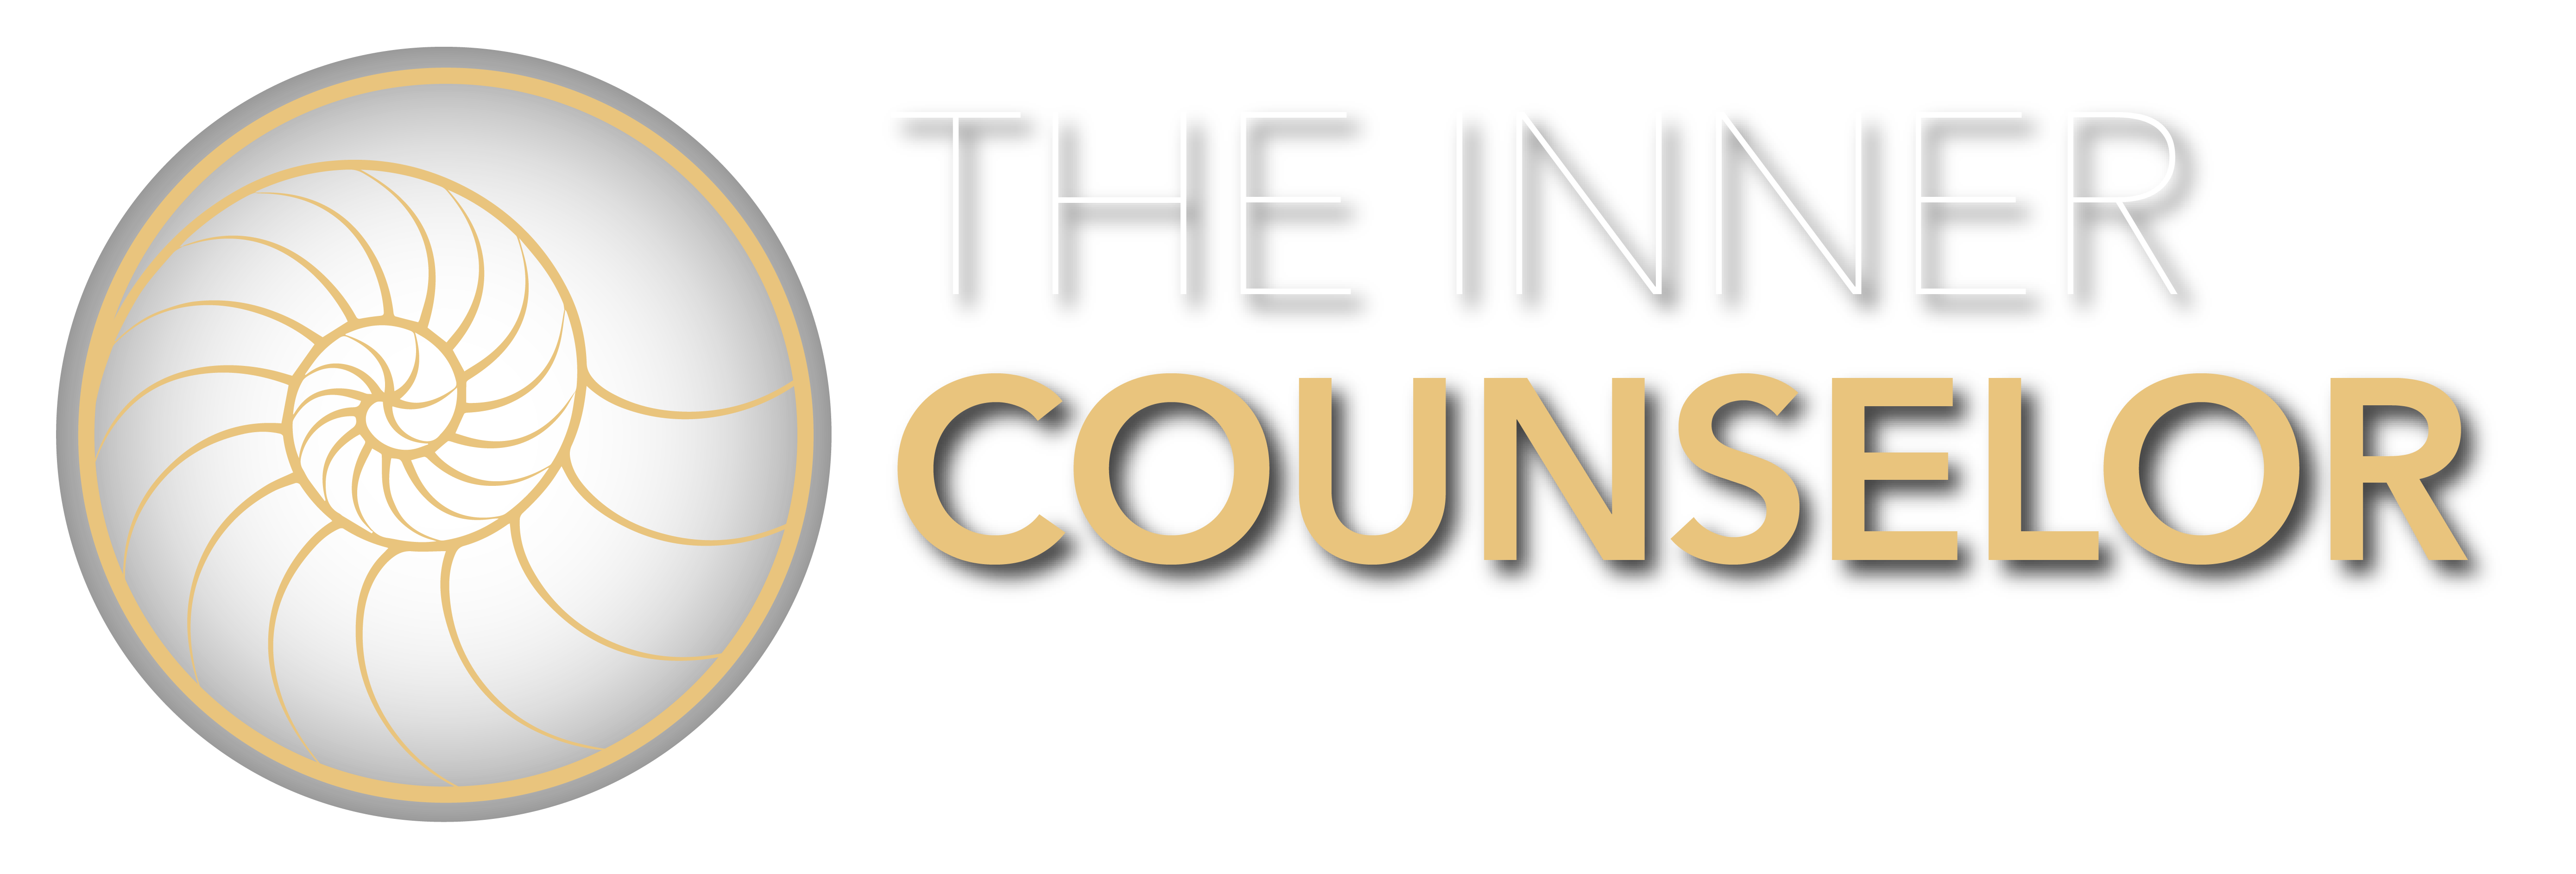 The Inner Counselor Process (ICP)™